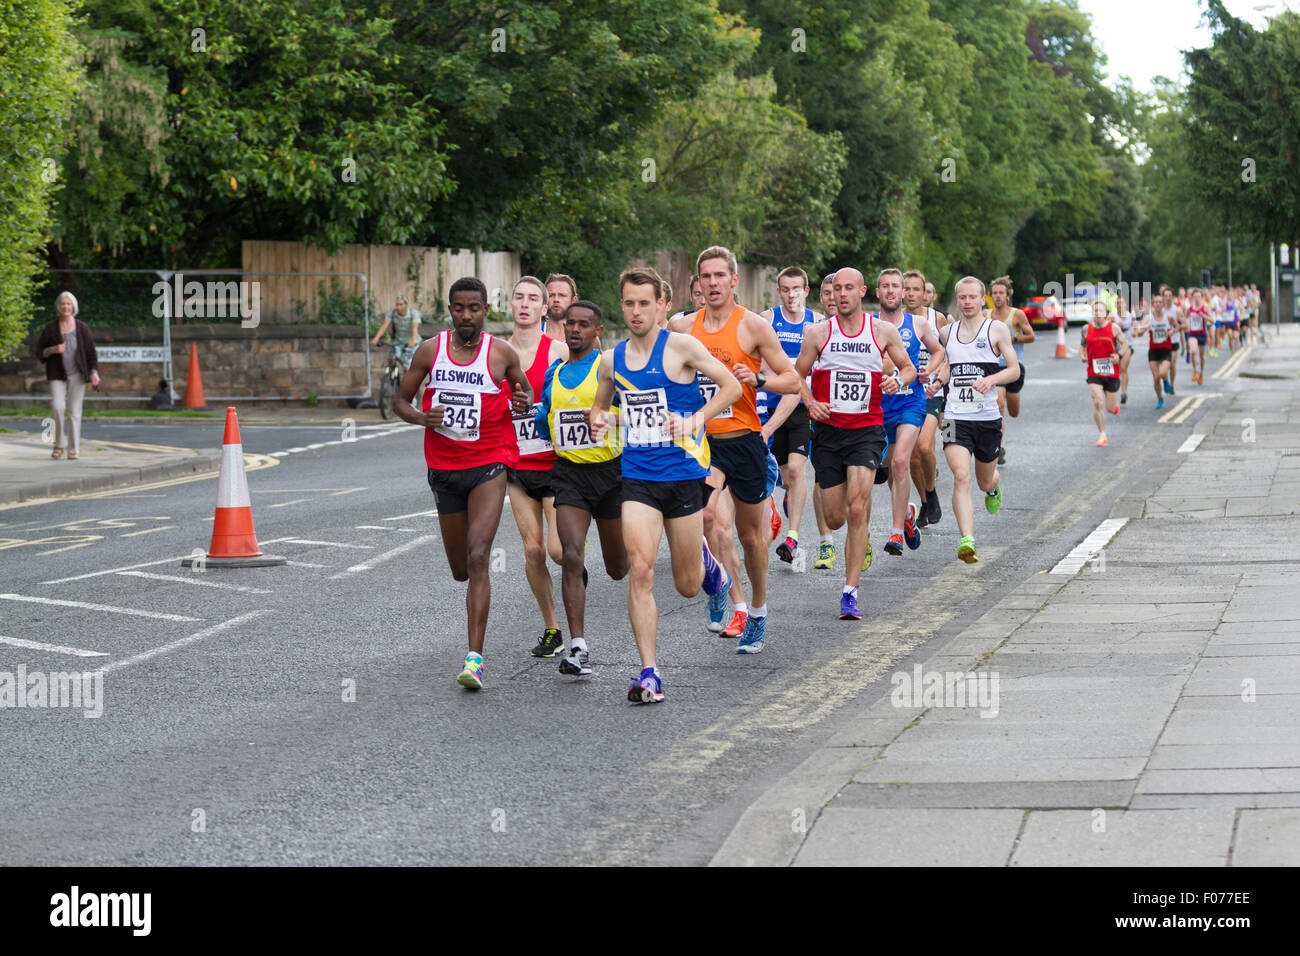 Darlington, Co. Durham, England, UK.  Sunday, 9th August, 2015.  Winners of the 28th annual Darlington 10km road race, seen here heading northwest along Woodland Road during the first of two circuits. Overall winner Marc Scott 1425, second from the left here, finished with a time of 30:42. Second place was taken by Tadele Geremew Mulugeta 1345, far left here, with 30:48, third place by Carl Smith 1785, fifth from the left here, with 30:55.  Fourth placed was Wondiye Indelbu 1420, fourth from the left here, with 31:11. Credit:  Andrew Nicholson/Alamy Live News Stock Photo